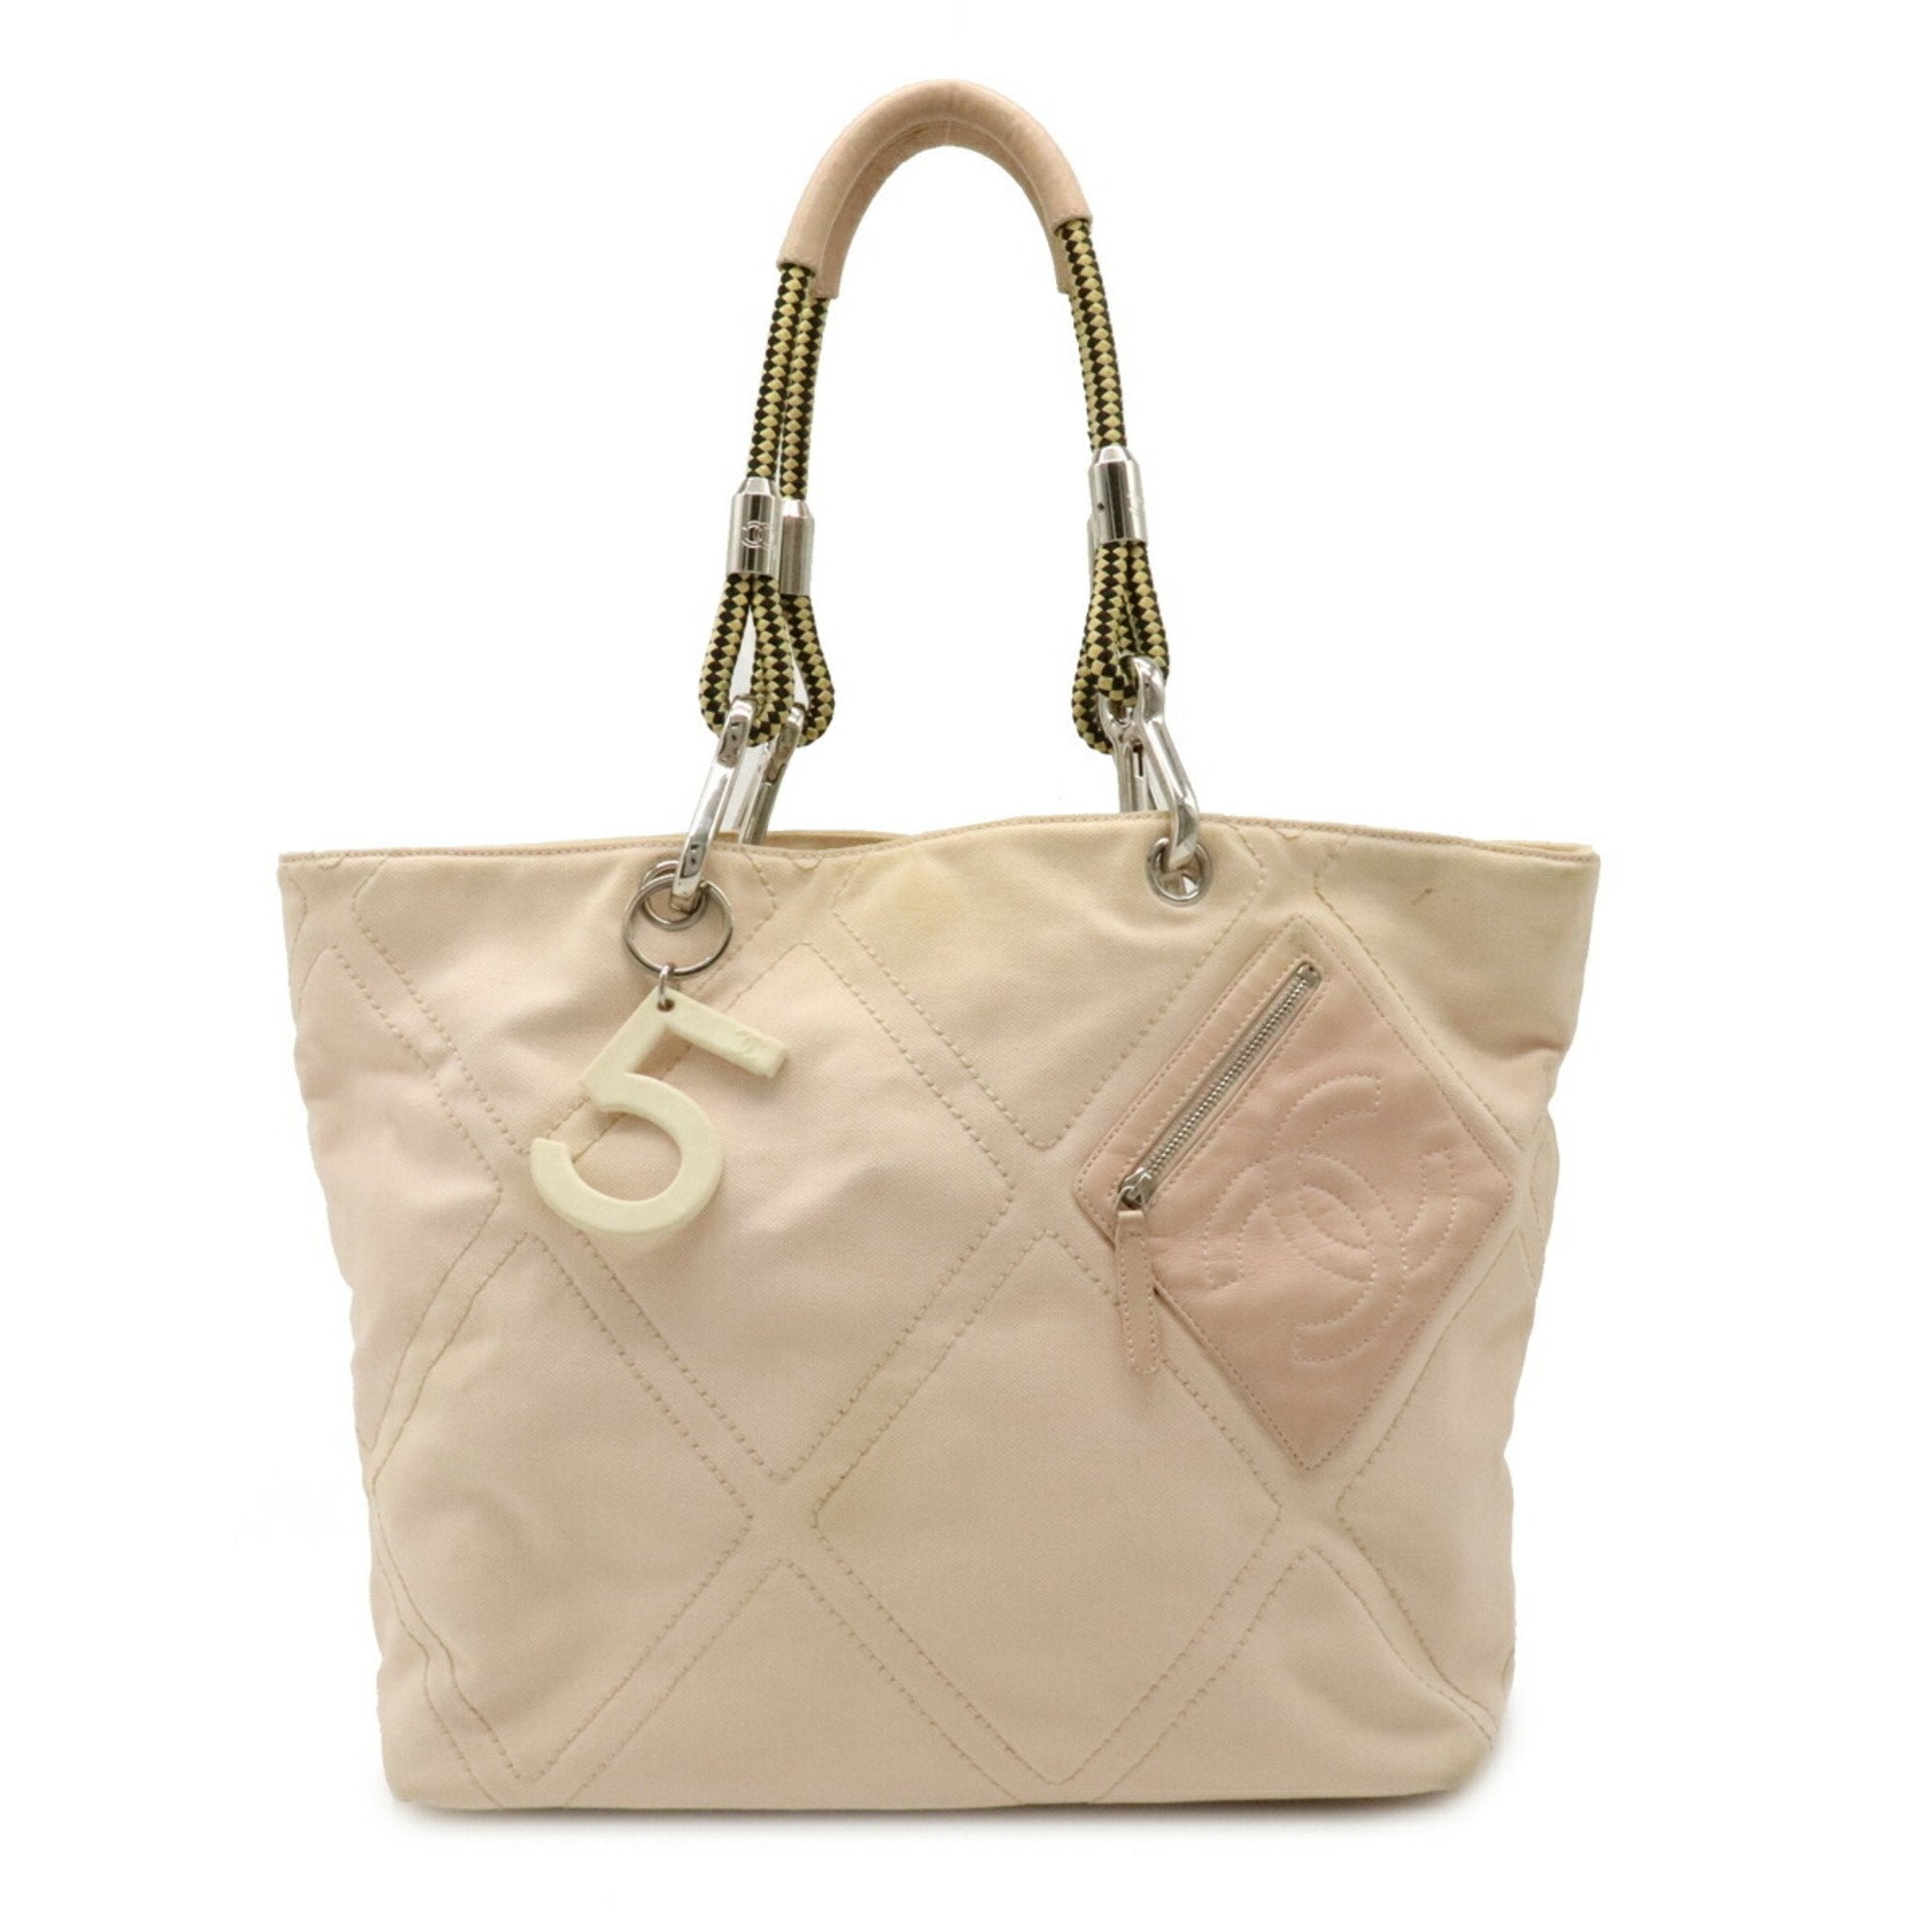 Sugarboo: Canvas Bag- Don't be like the rest, Coco Chanel